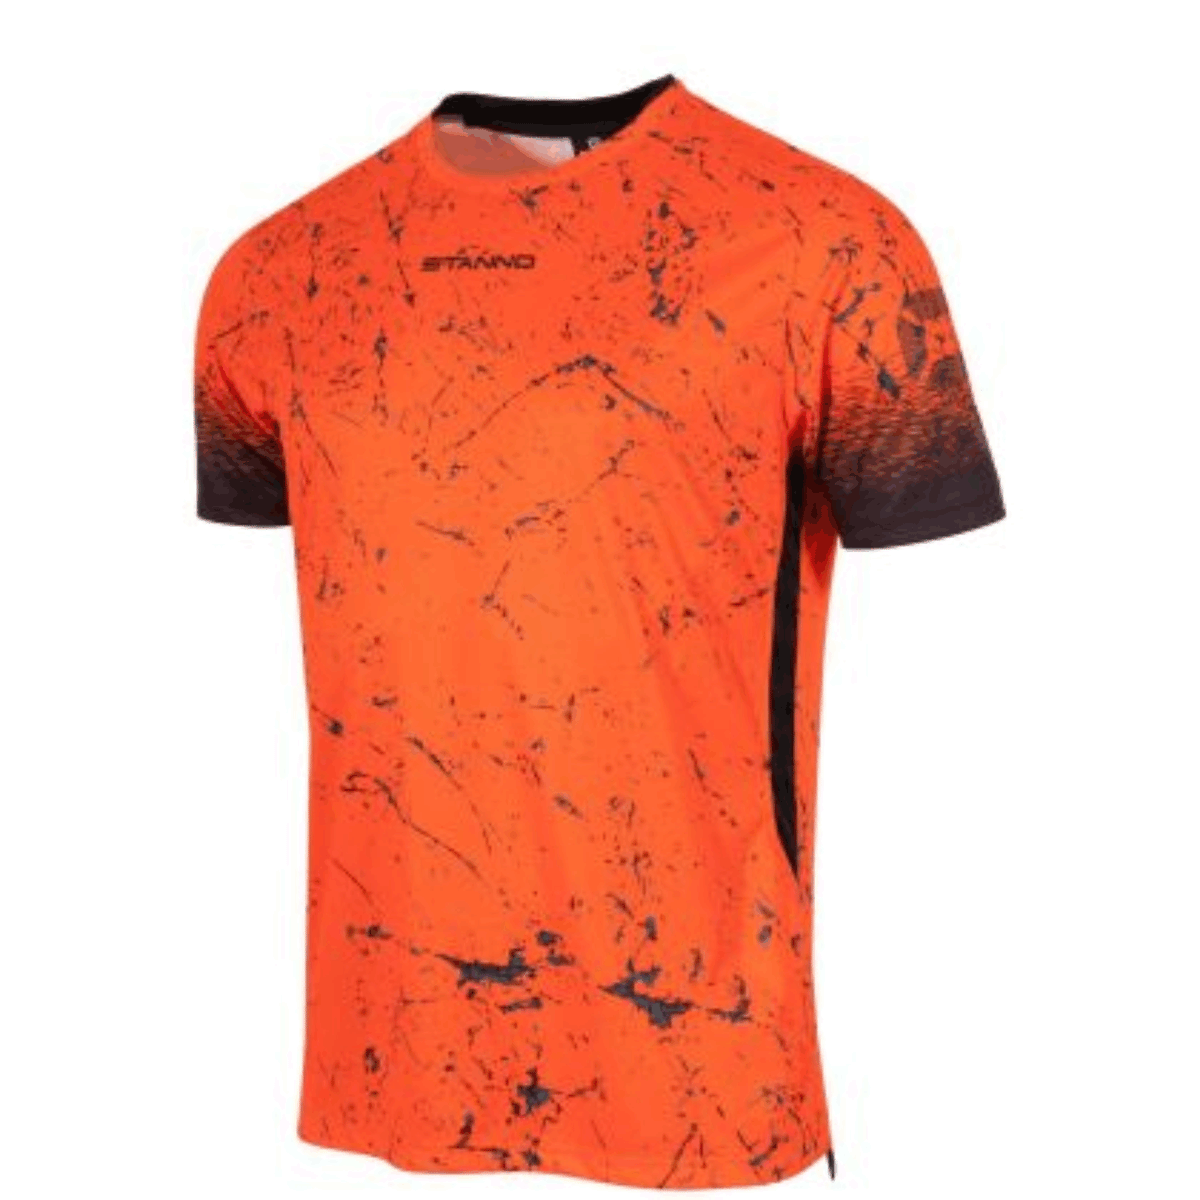 Leicester Wildecats - Stanno Spry Limited Goalkeeper Jersey